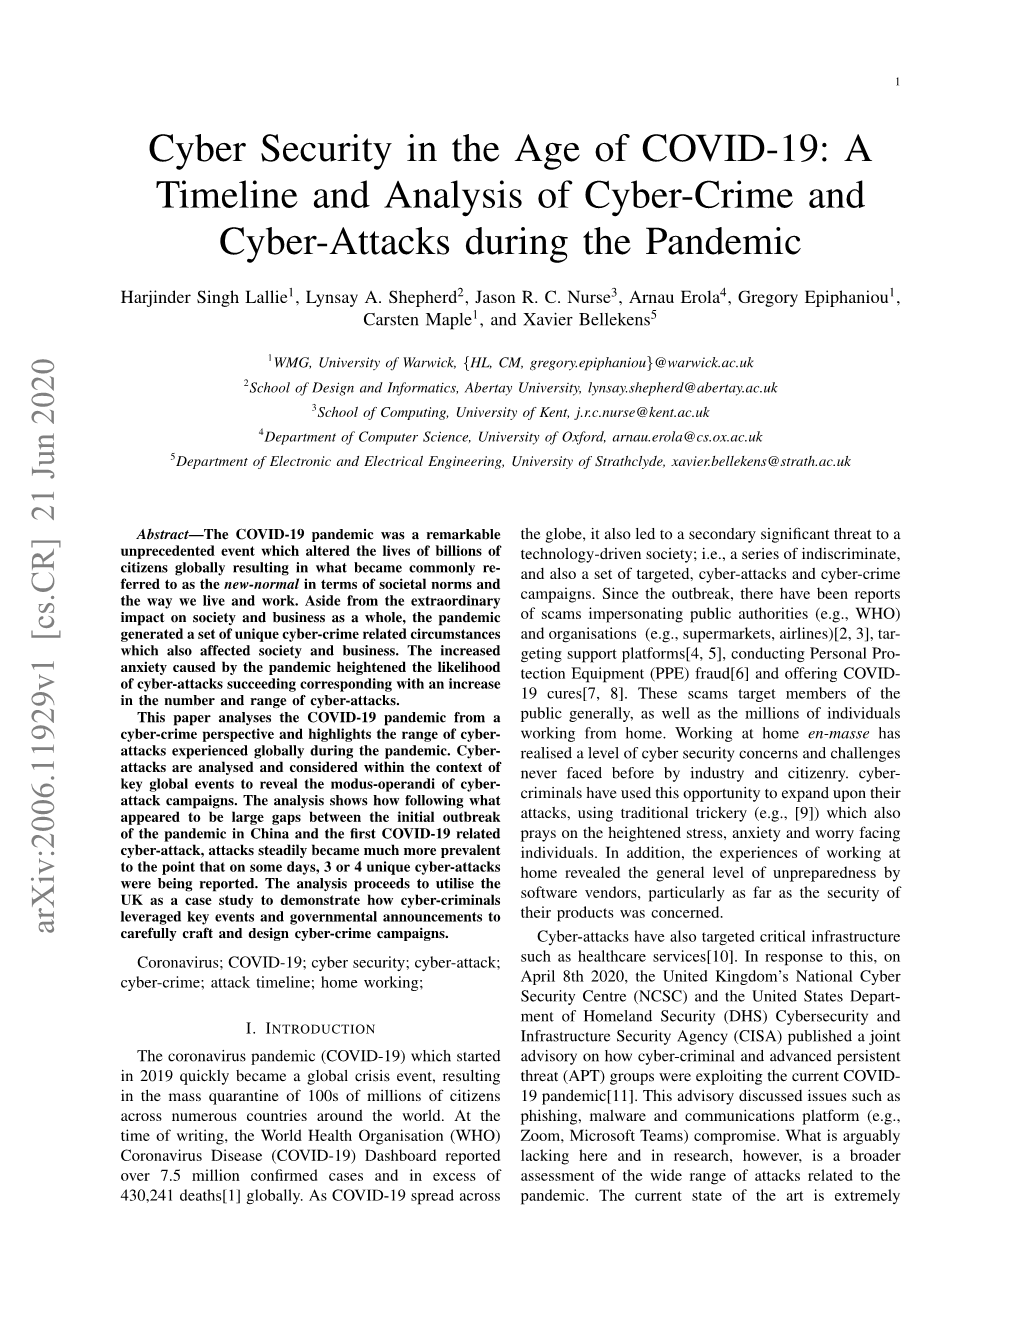 Cyber Security in the Age of COVID-19: a Timeline and Analysis of Cyber-Crime and Cyber-Attacks During the Pandemic